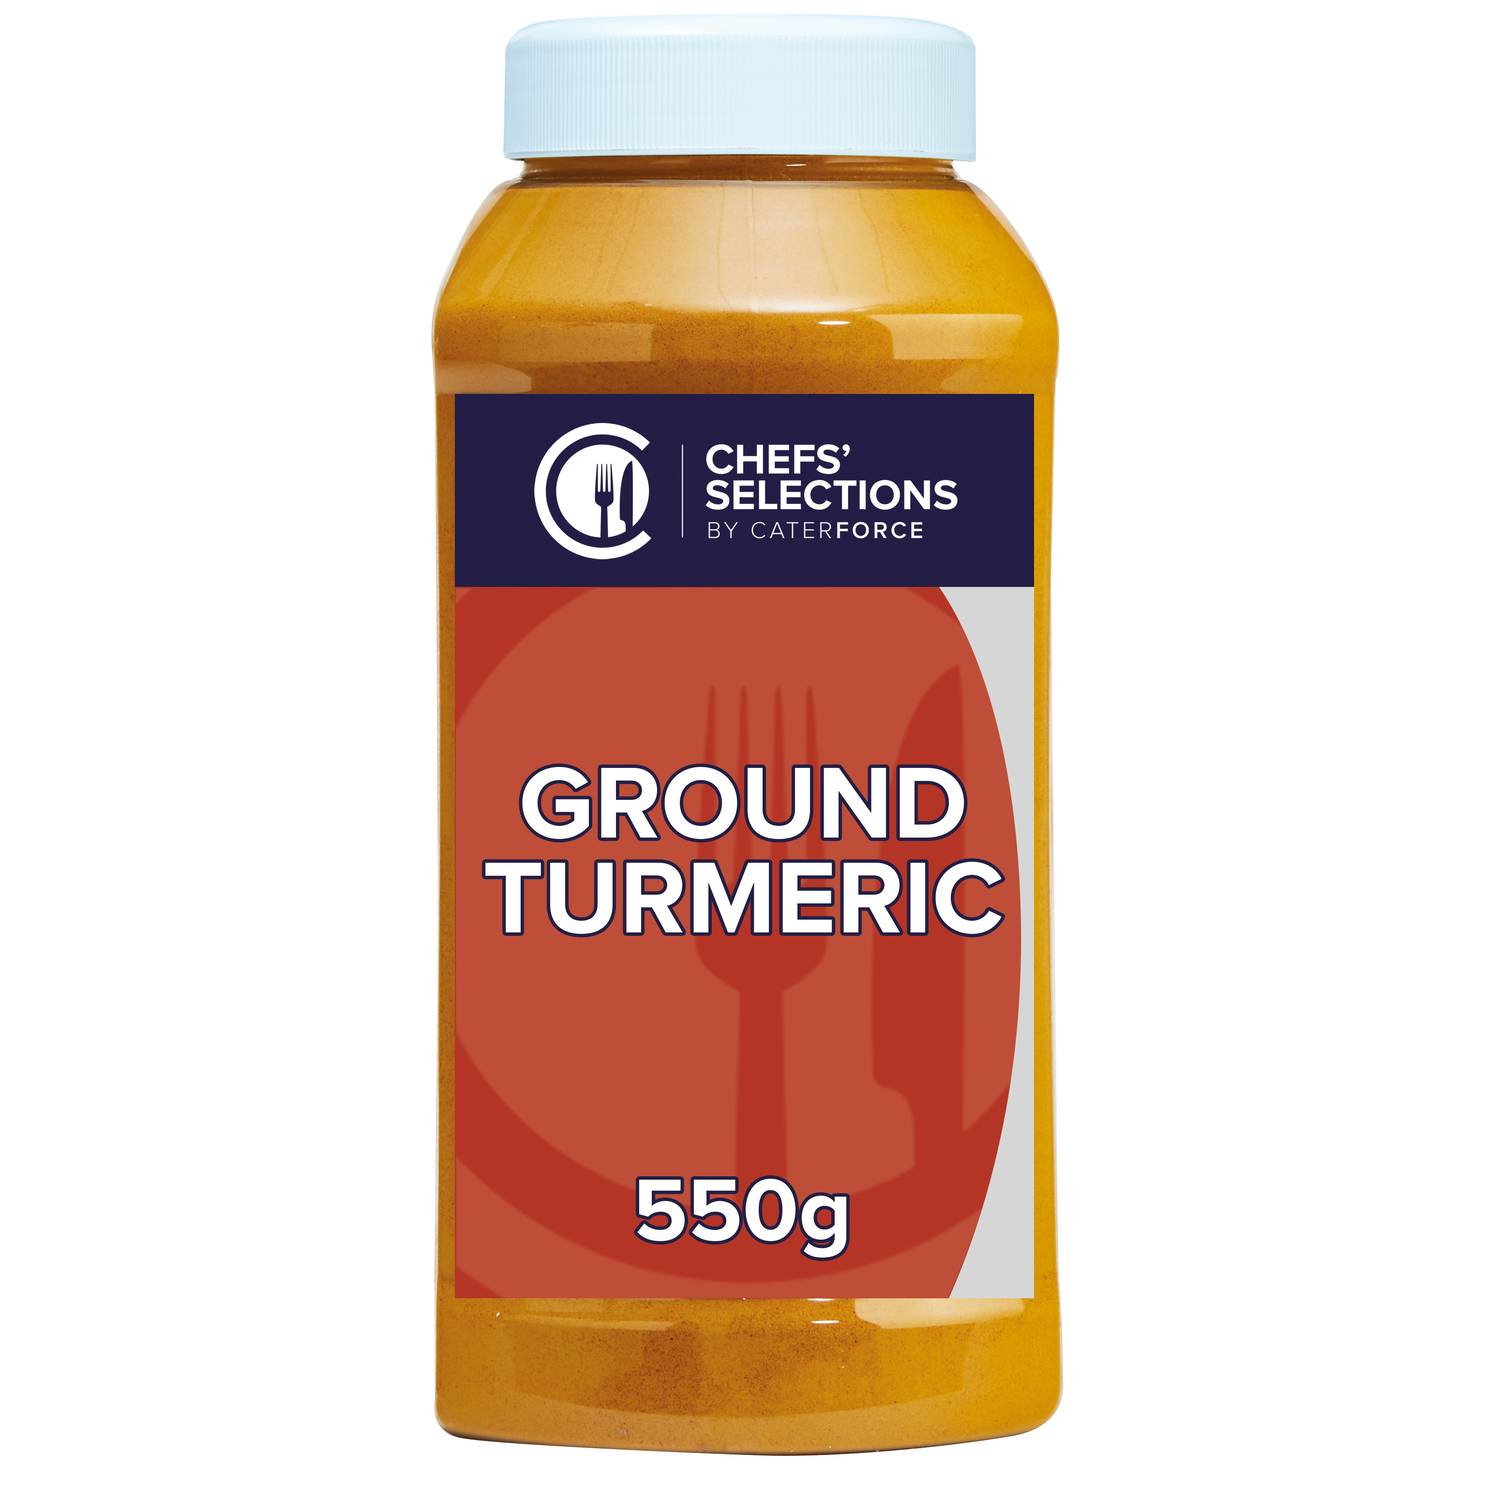 Chefs’ Selections Ground Turmeric (6 x 550g)